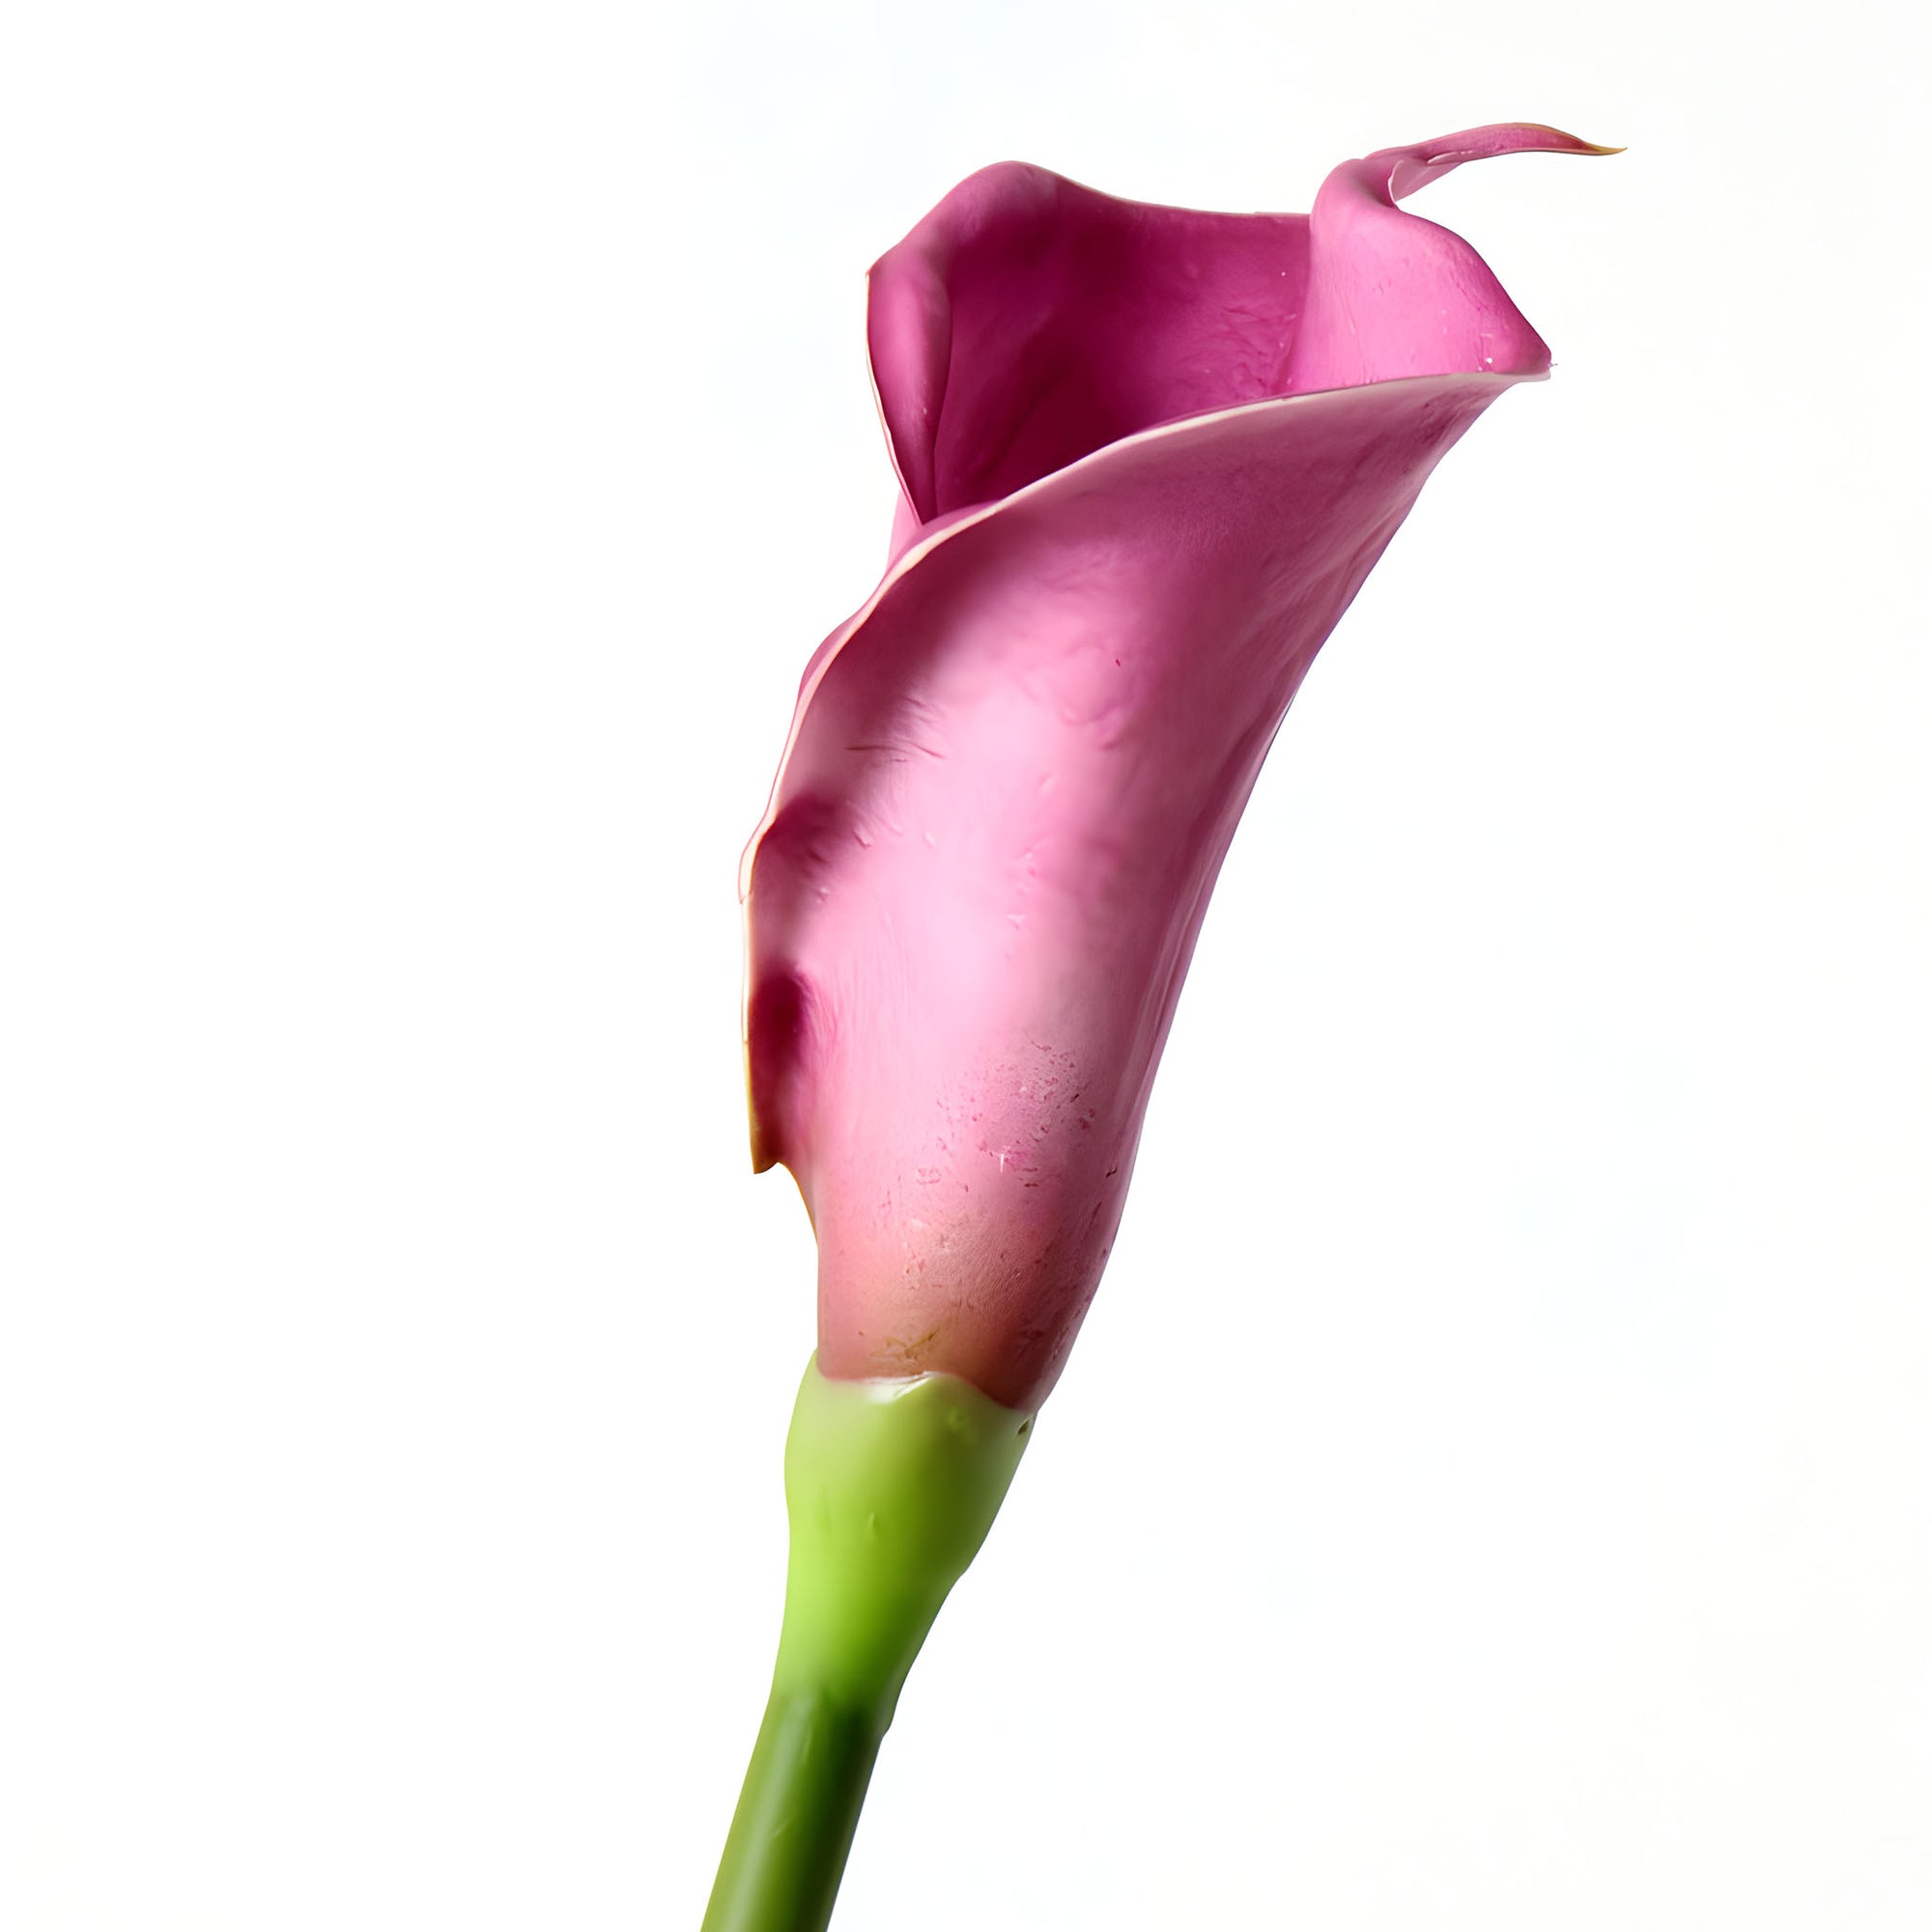 Large Calla Lily Artificial Flowers Tall Calla Lilies